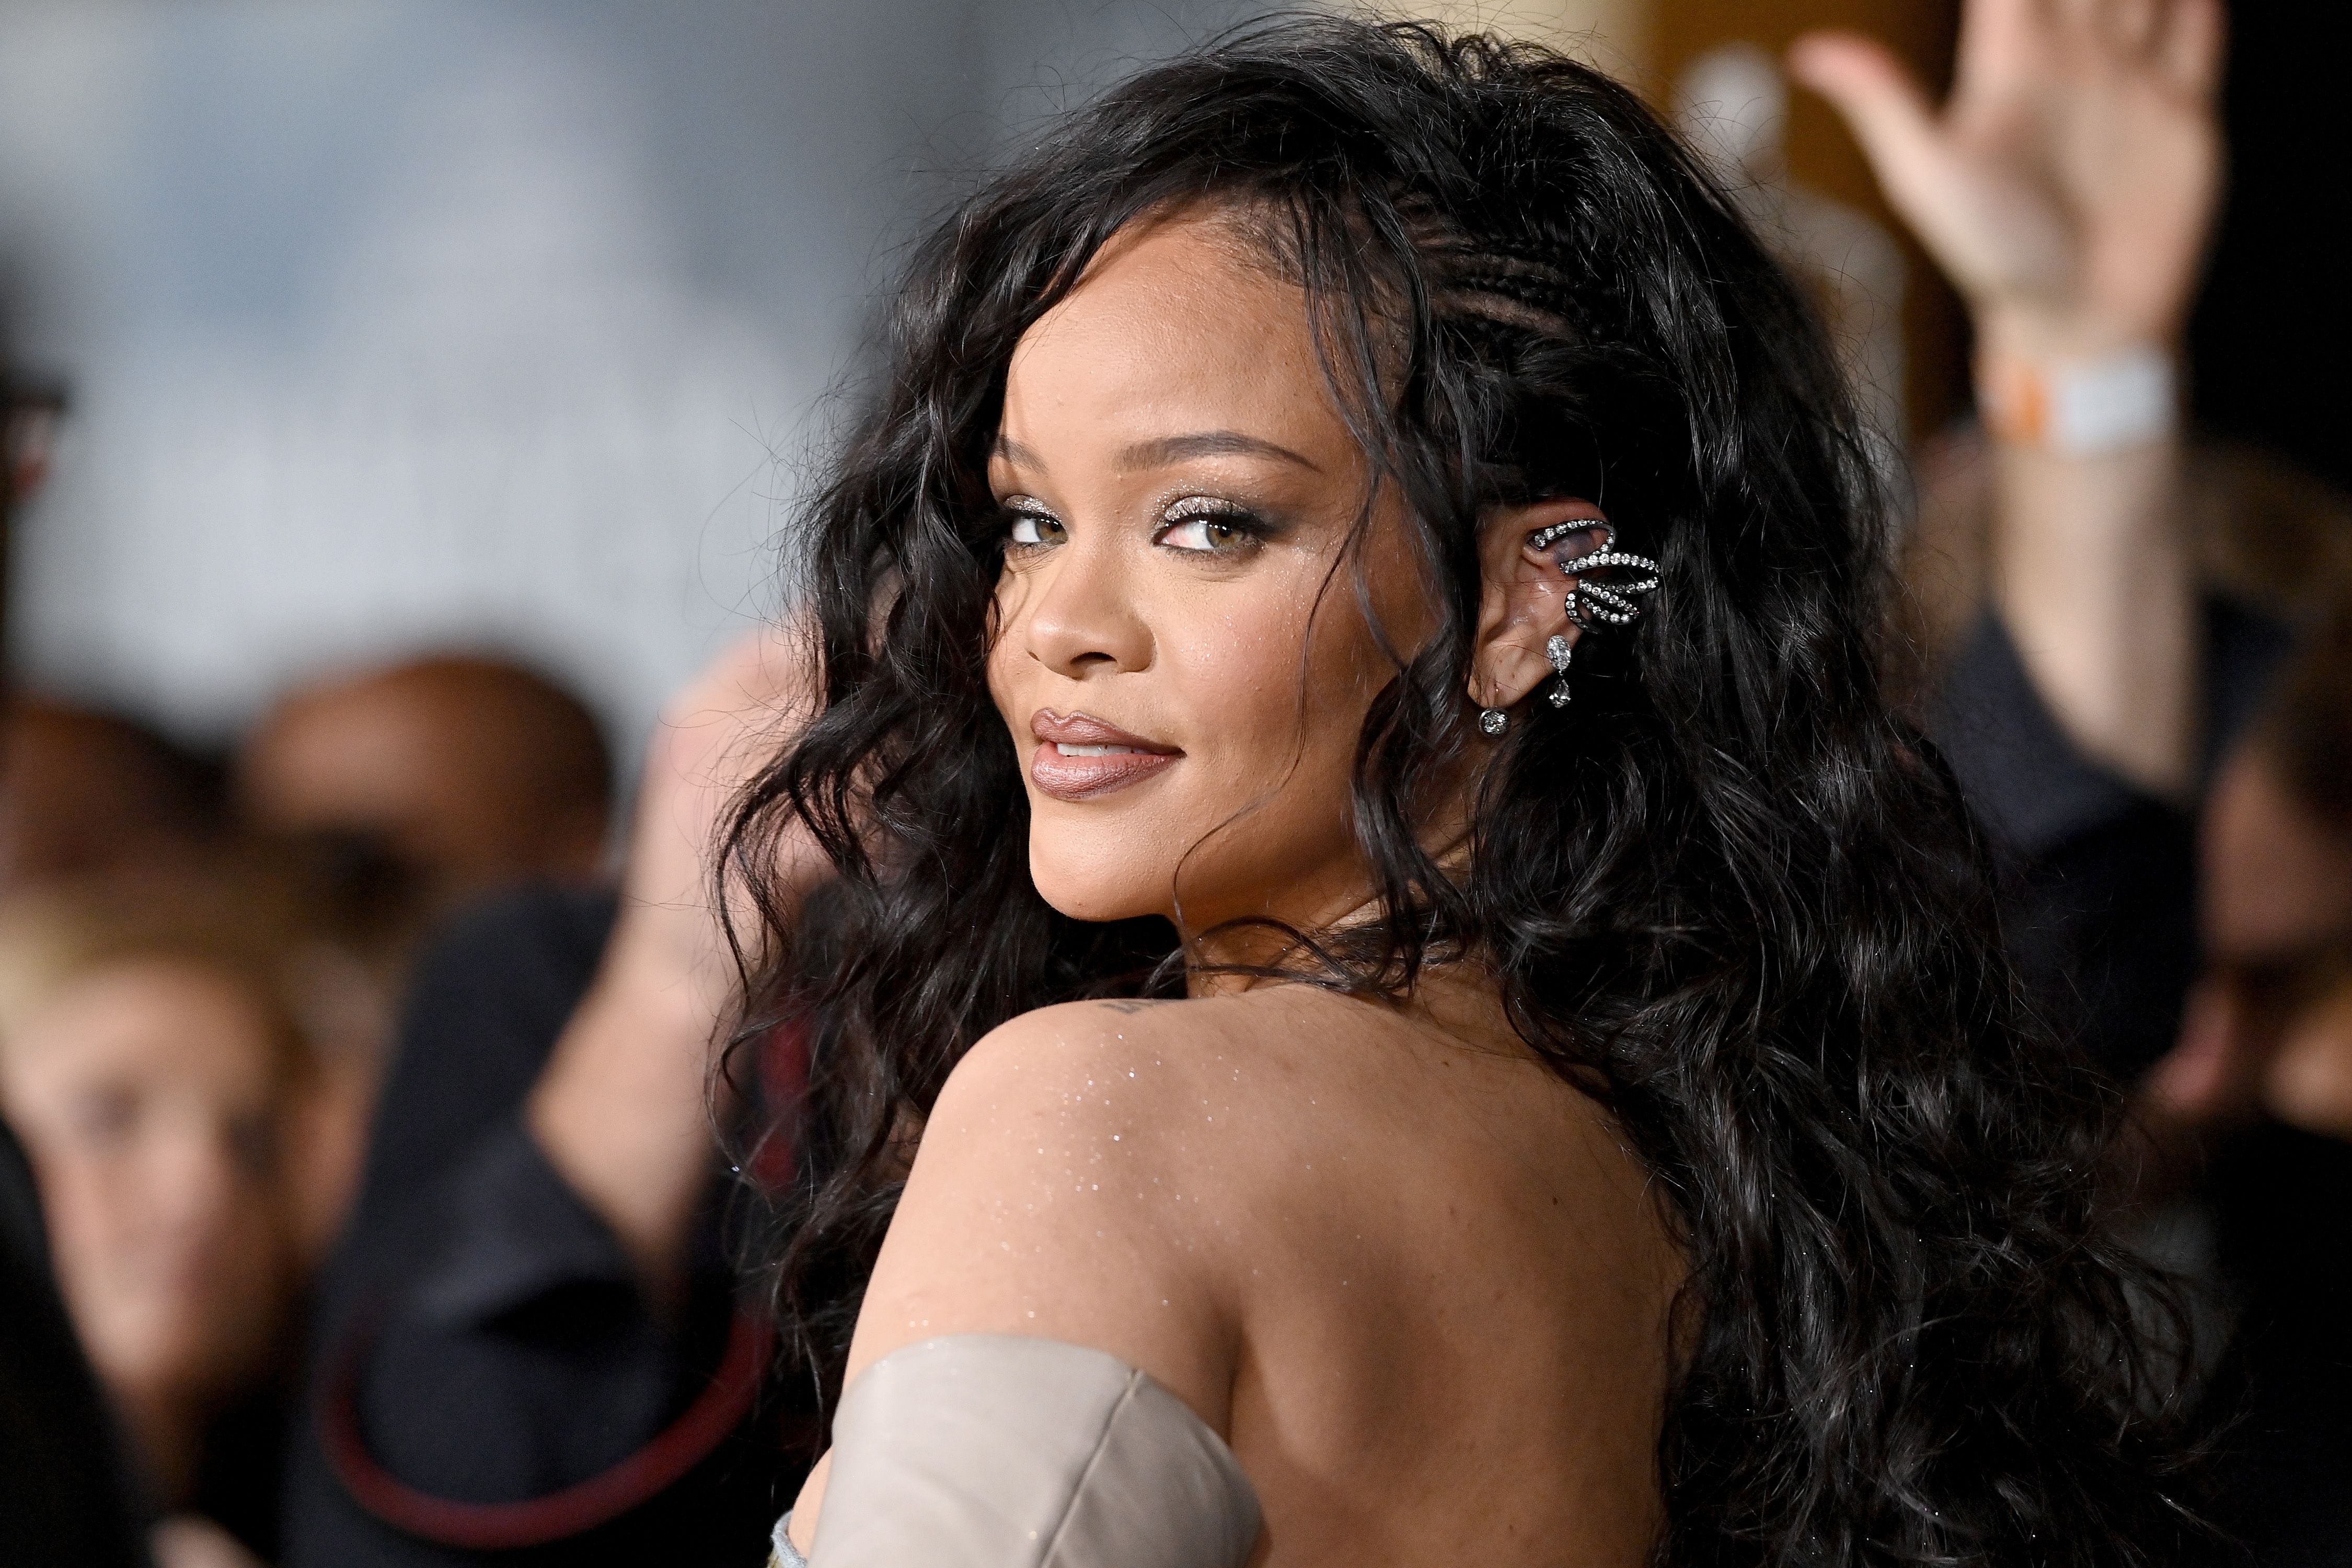 Rihanna to Release New Album in November - The New York Times